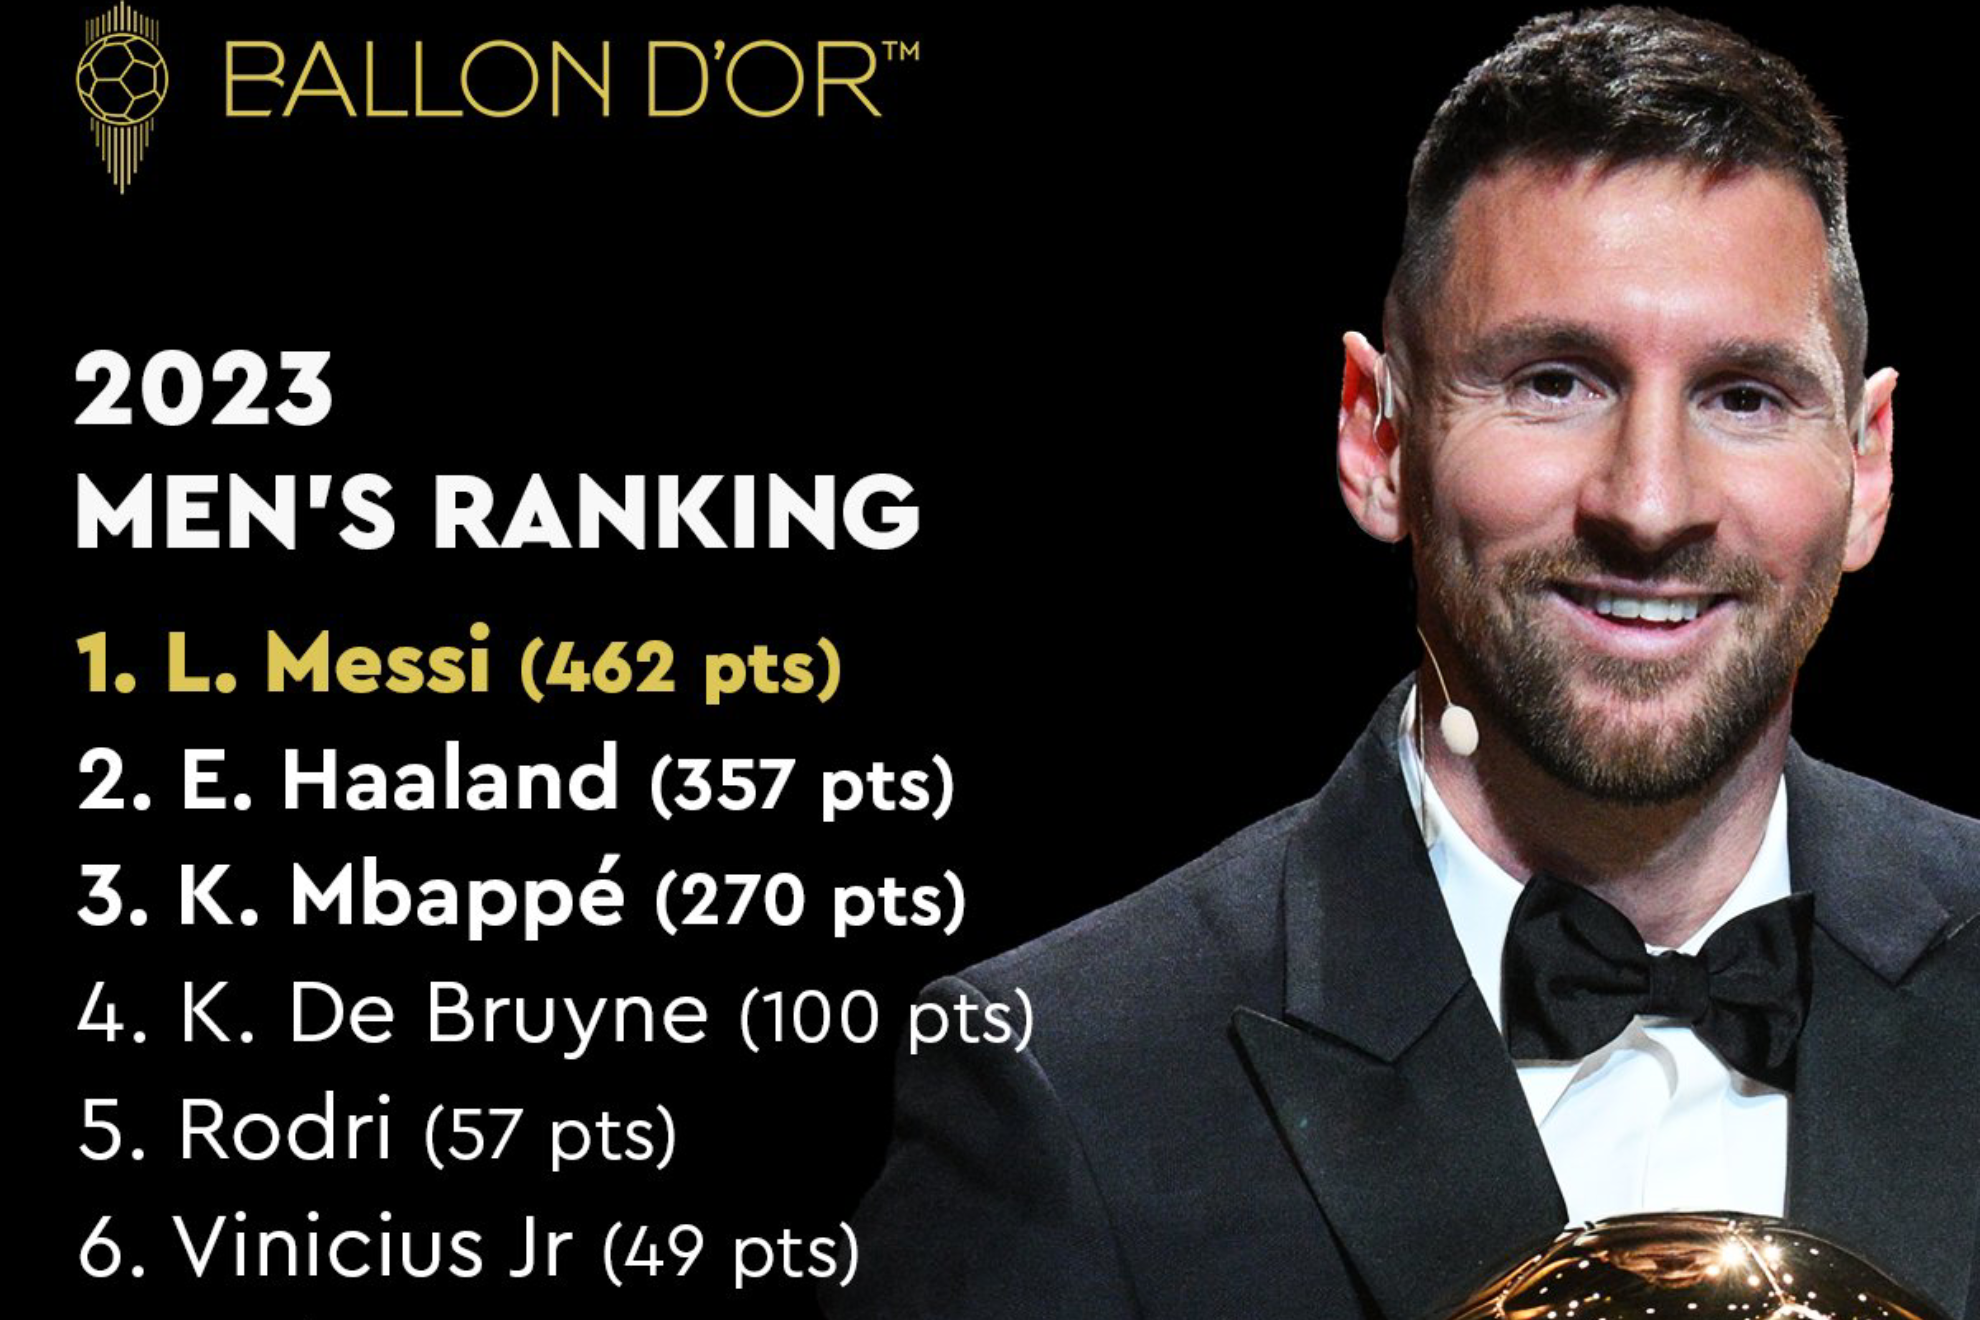 Ballon d'Or votes revealed: Who voted for Messi and how many votes did he receive?